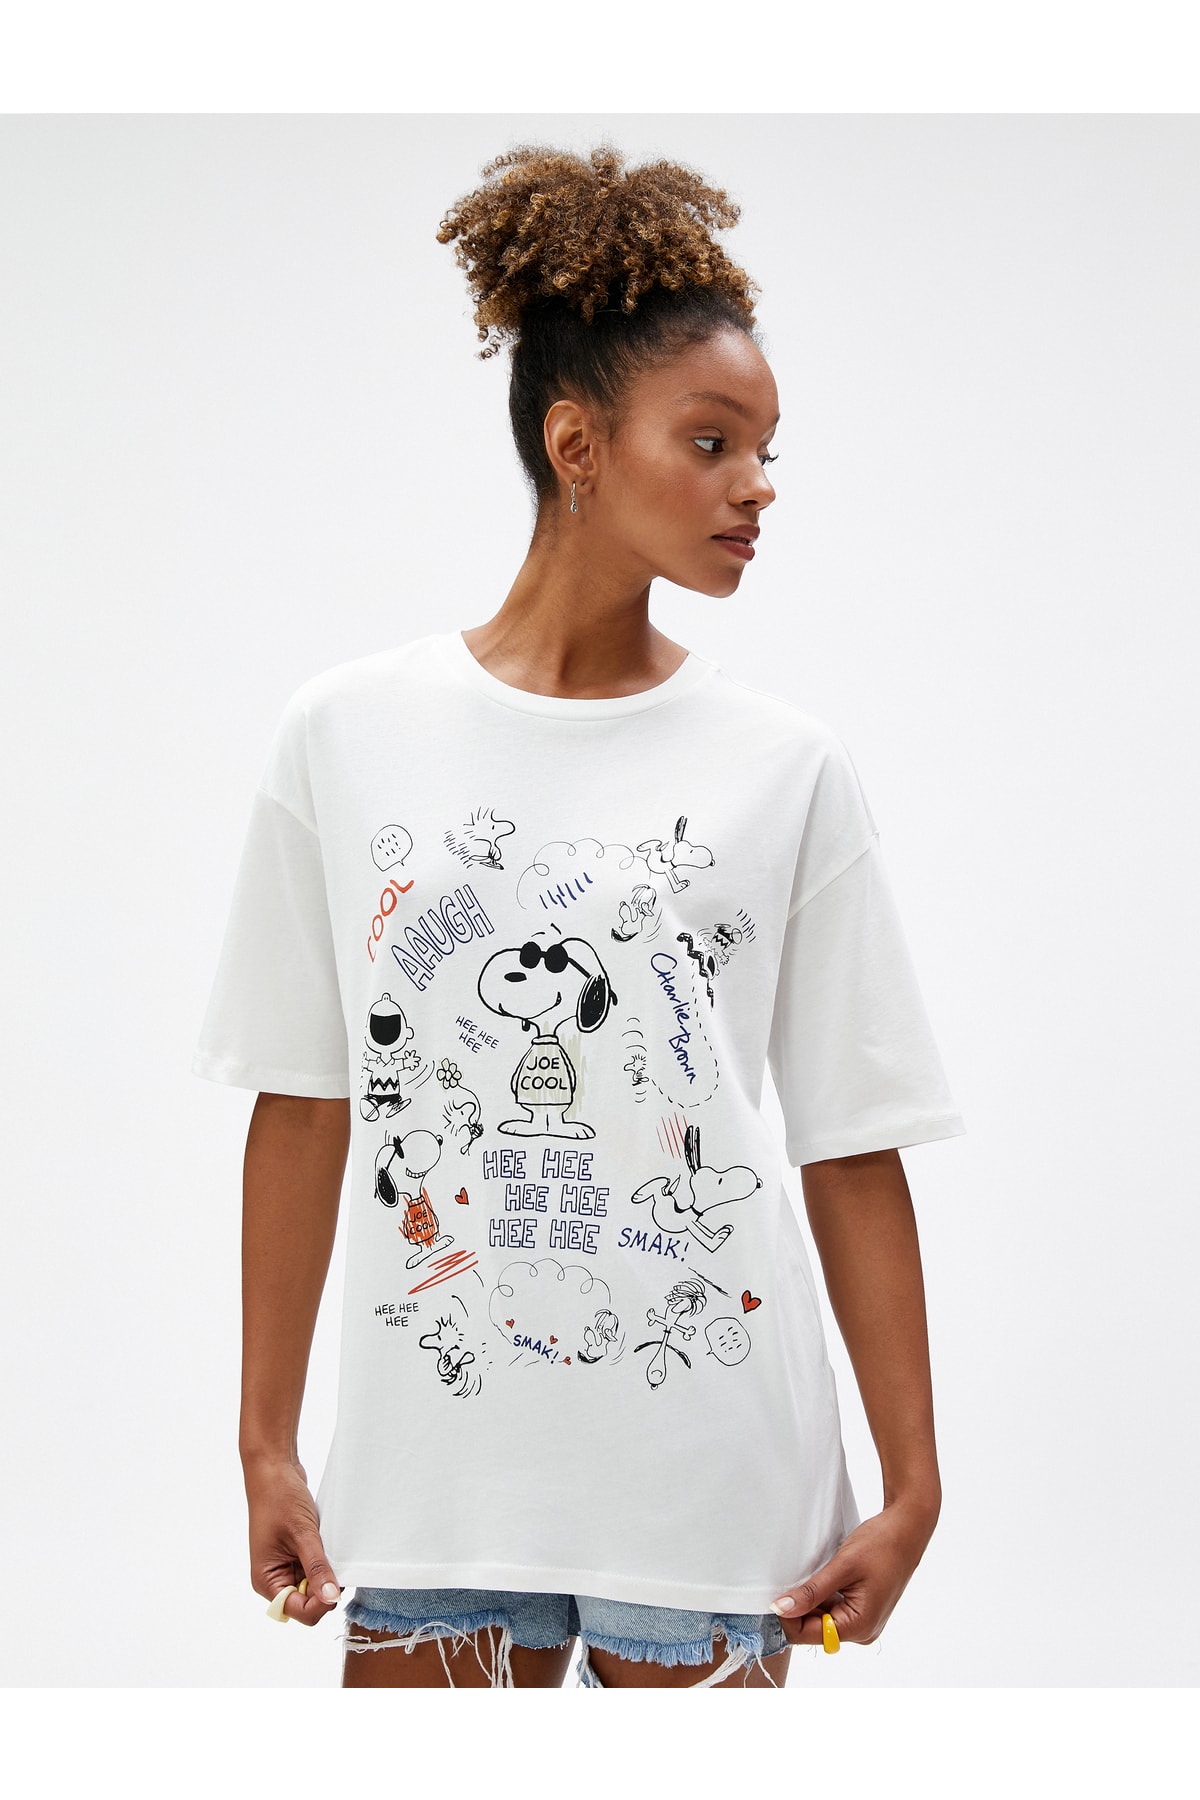 Levně Koton Snoopy Oversized Printed Licensed Crew Neck Short Sleeved Snoopy T-Shirt.